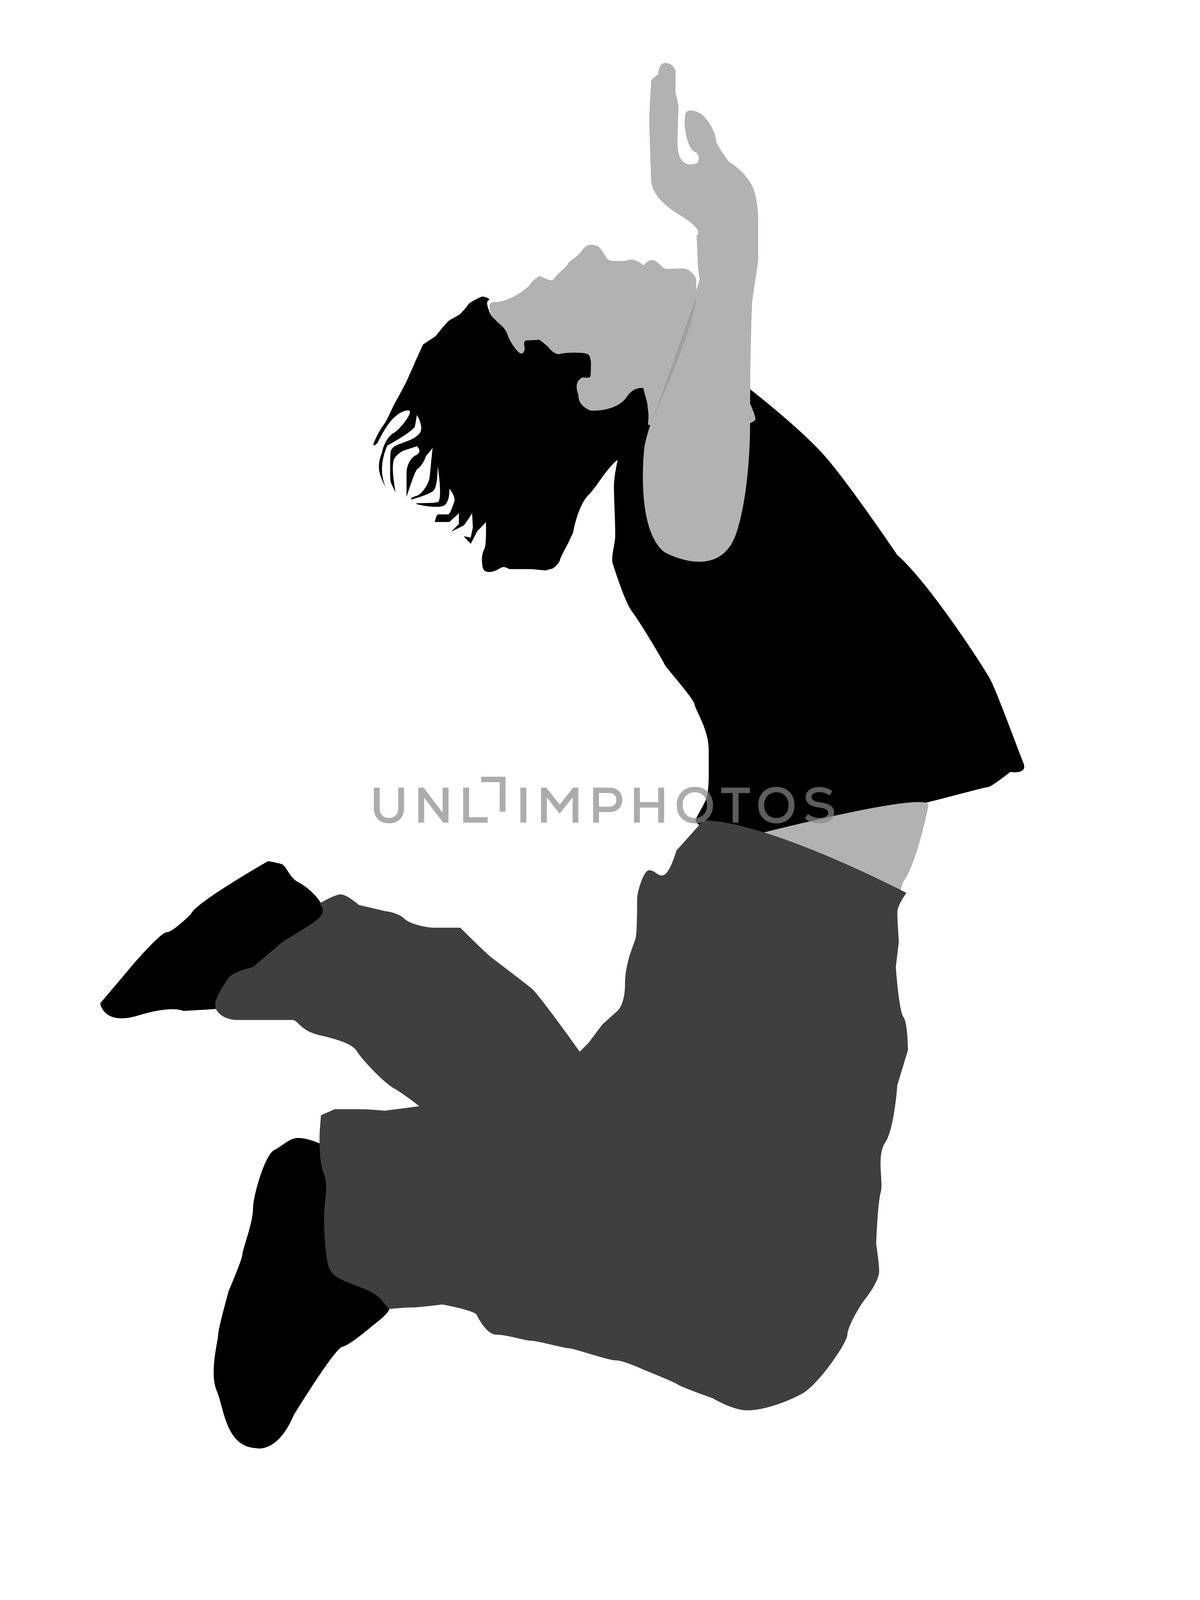 person jumping with arms up on white background